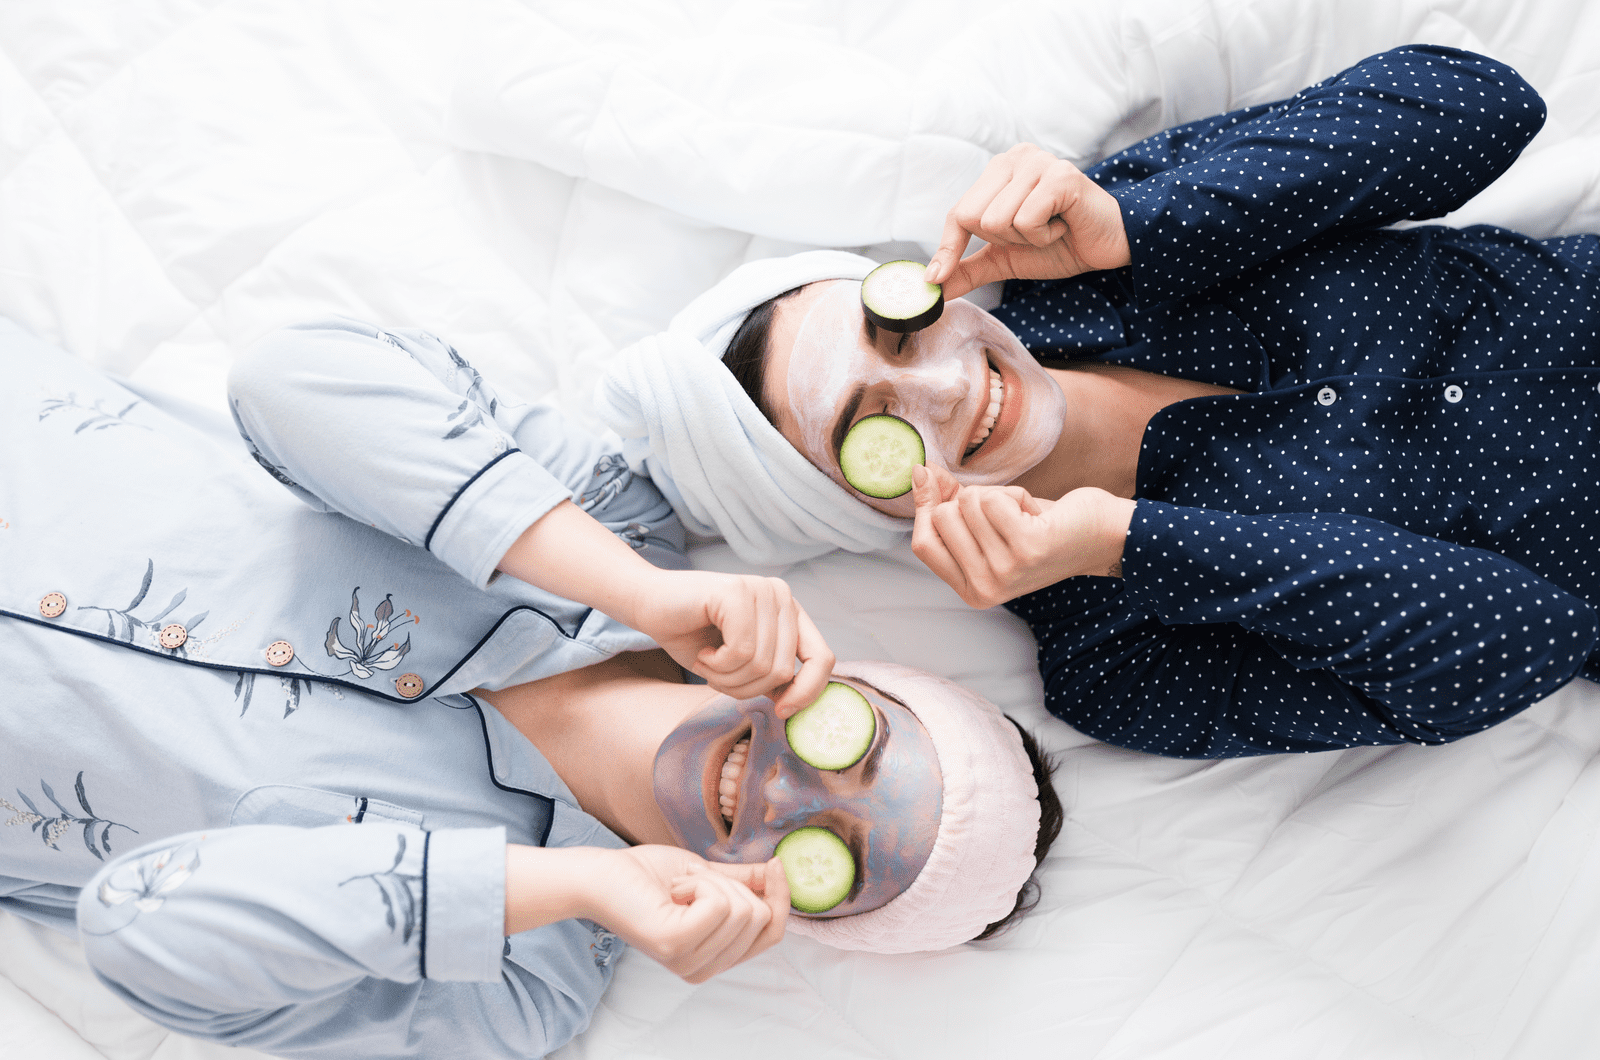 50+ Fun Things To Do At Sleepovers With Your Best Friend